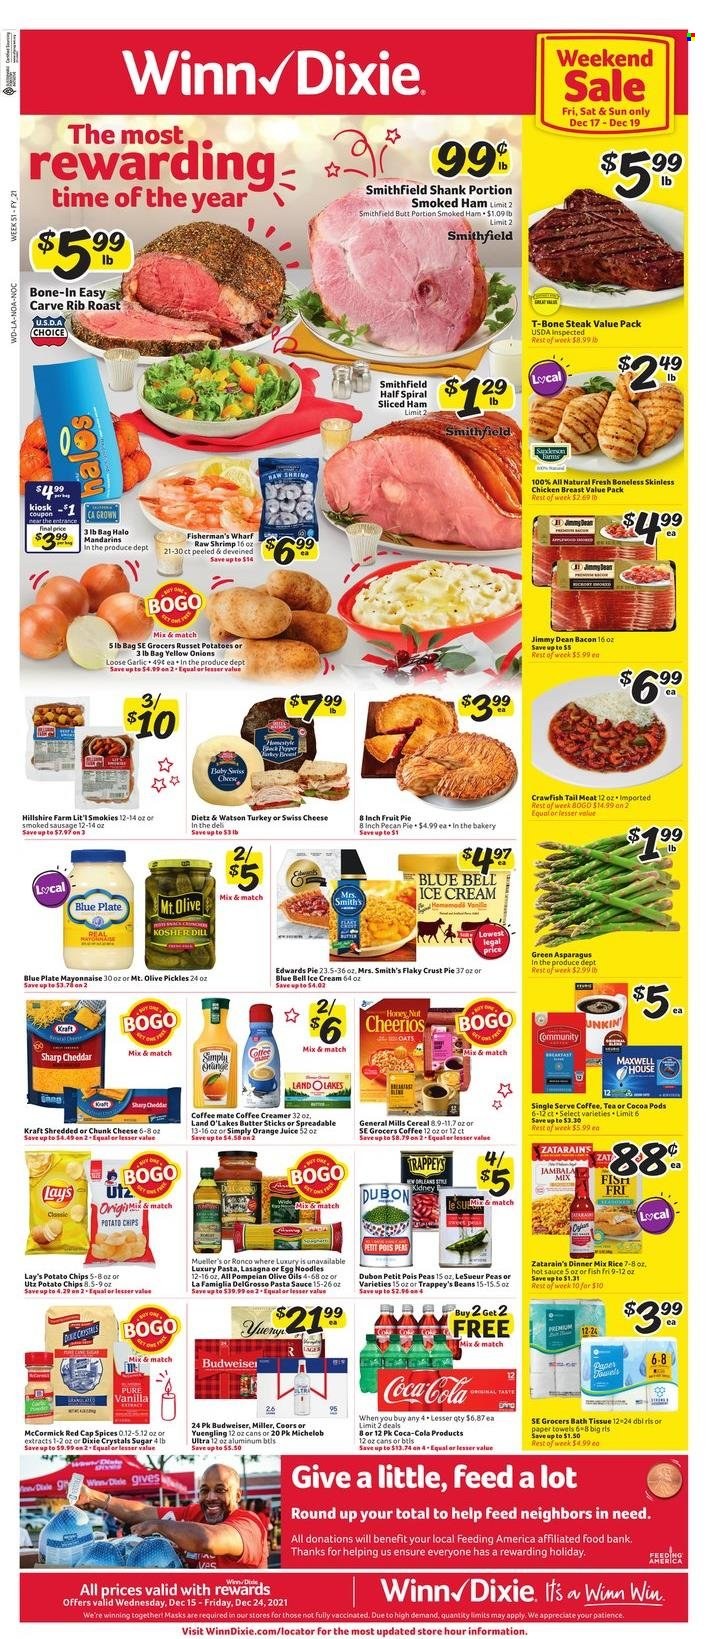 thumbnail - Winn Dixie Flyer - 12/15/2021 - 12/24/2021 - Sales products - pie, asparagus, garlic, russet potatoes, peas, onion, mandarines, shrimps, pasta sauce, sauce, noodles, lasagna meal, Kraft®, Jimmy Dean, bacon, ham, Hillshire Farm, smoked ham, Dietz & Watson, sausage, smoked sausage, swiss cheese, cheese, chunk cheese, Coffee-Mate, butter, creamer, mayonnaise, ice cream, Blue Bell, crawfish, potato chips, chips, Lay’s, Smith's, sugar, oats, pickles, cereals, Cheerios, rice, egg noodles, dill, hot sauce, Coca-Cola, orange juice, juice, Maxwell House, beer, Miller, beef meat, t-bone steak, steak, bath tissue, kitchen towels, paper towels, plate, Budweiser, Coors, Yuengling, Michelob. Page 1.